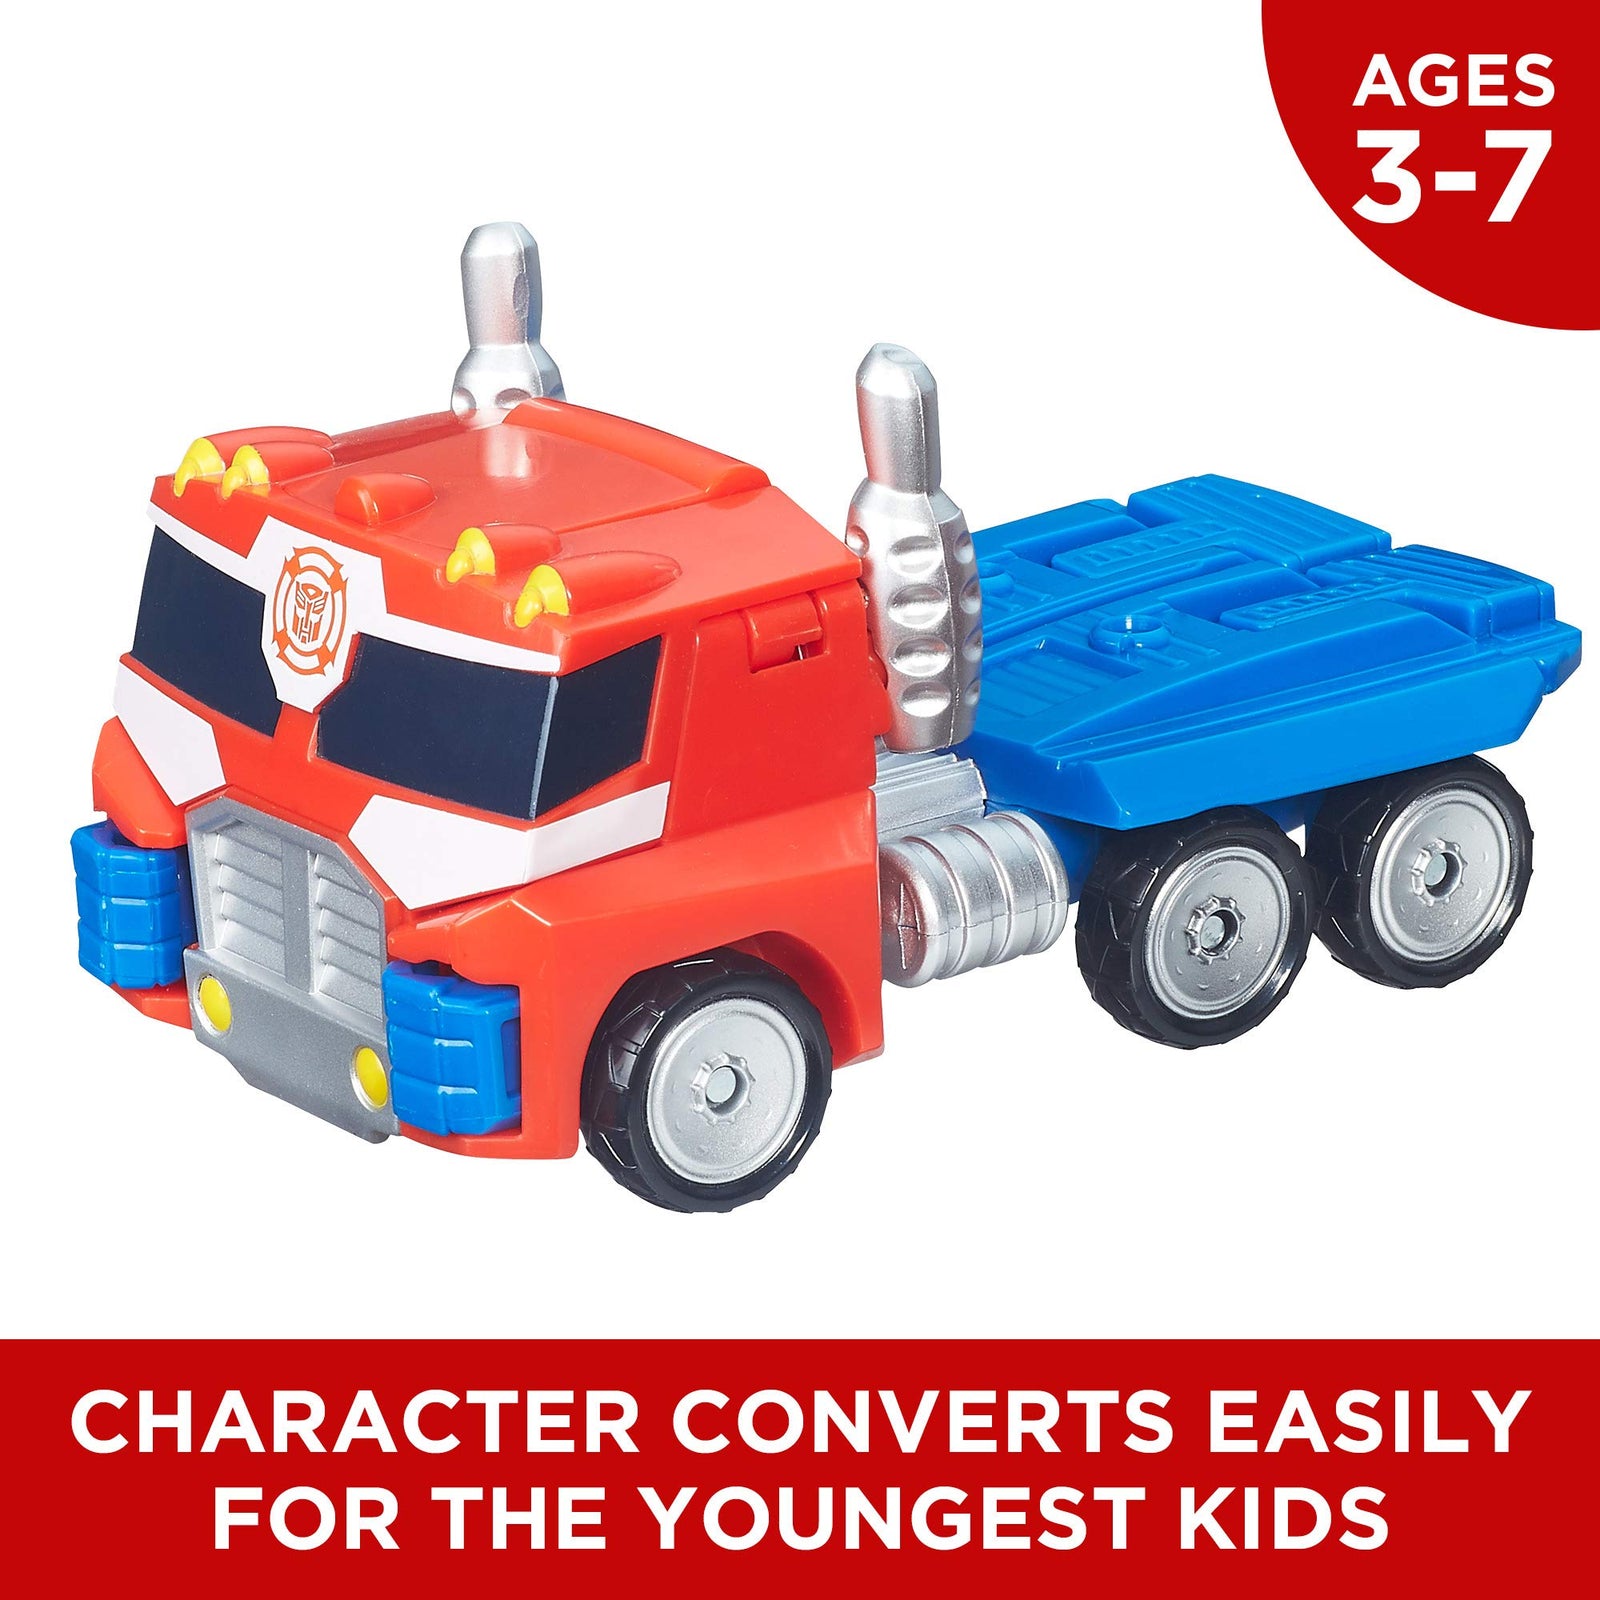 Playskool Heroes Transformers Rescue Bots Energize Optimus Prime Action Figure, Ages 3-7 (Amazon Exclusive)